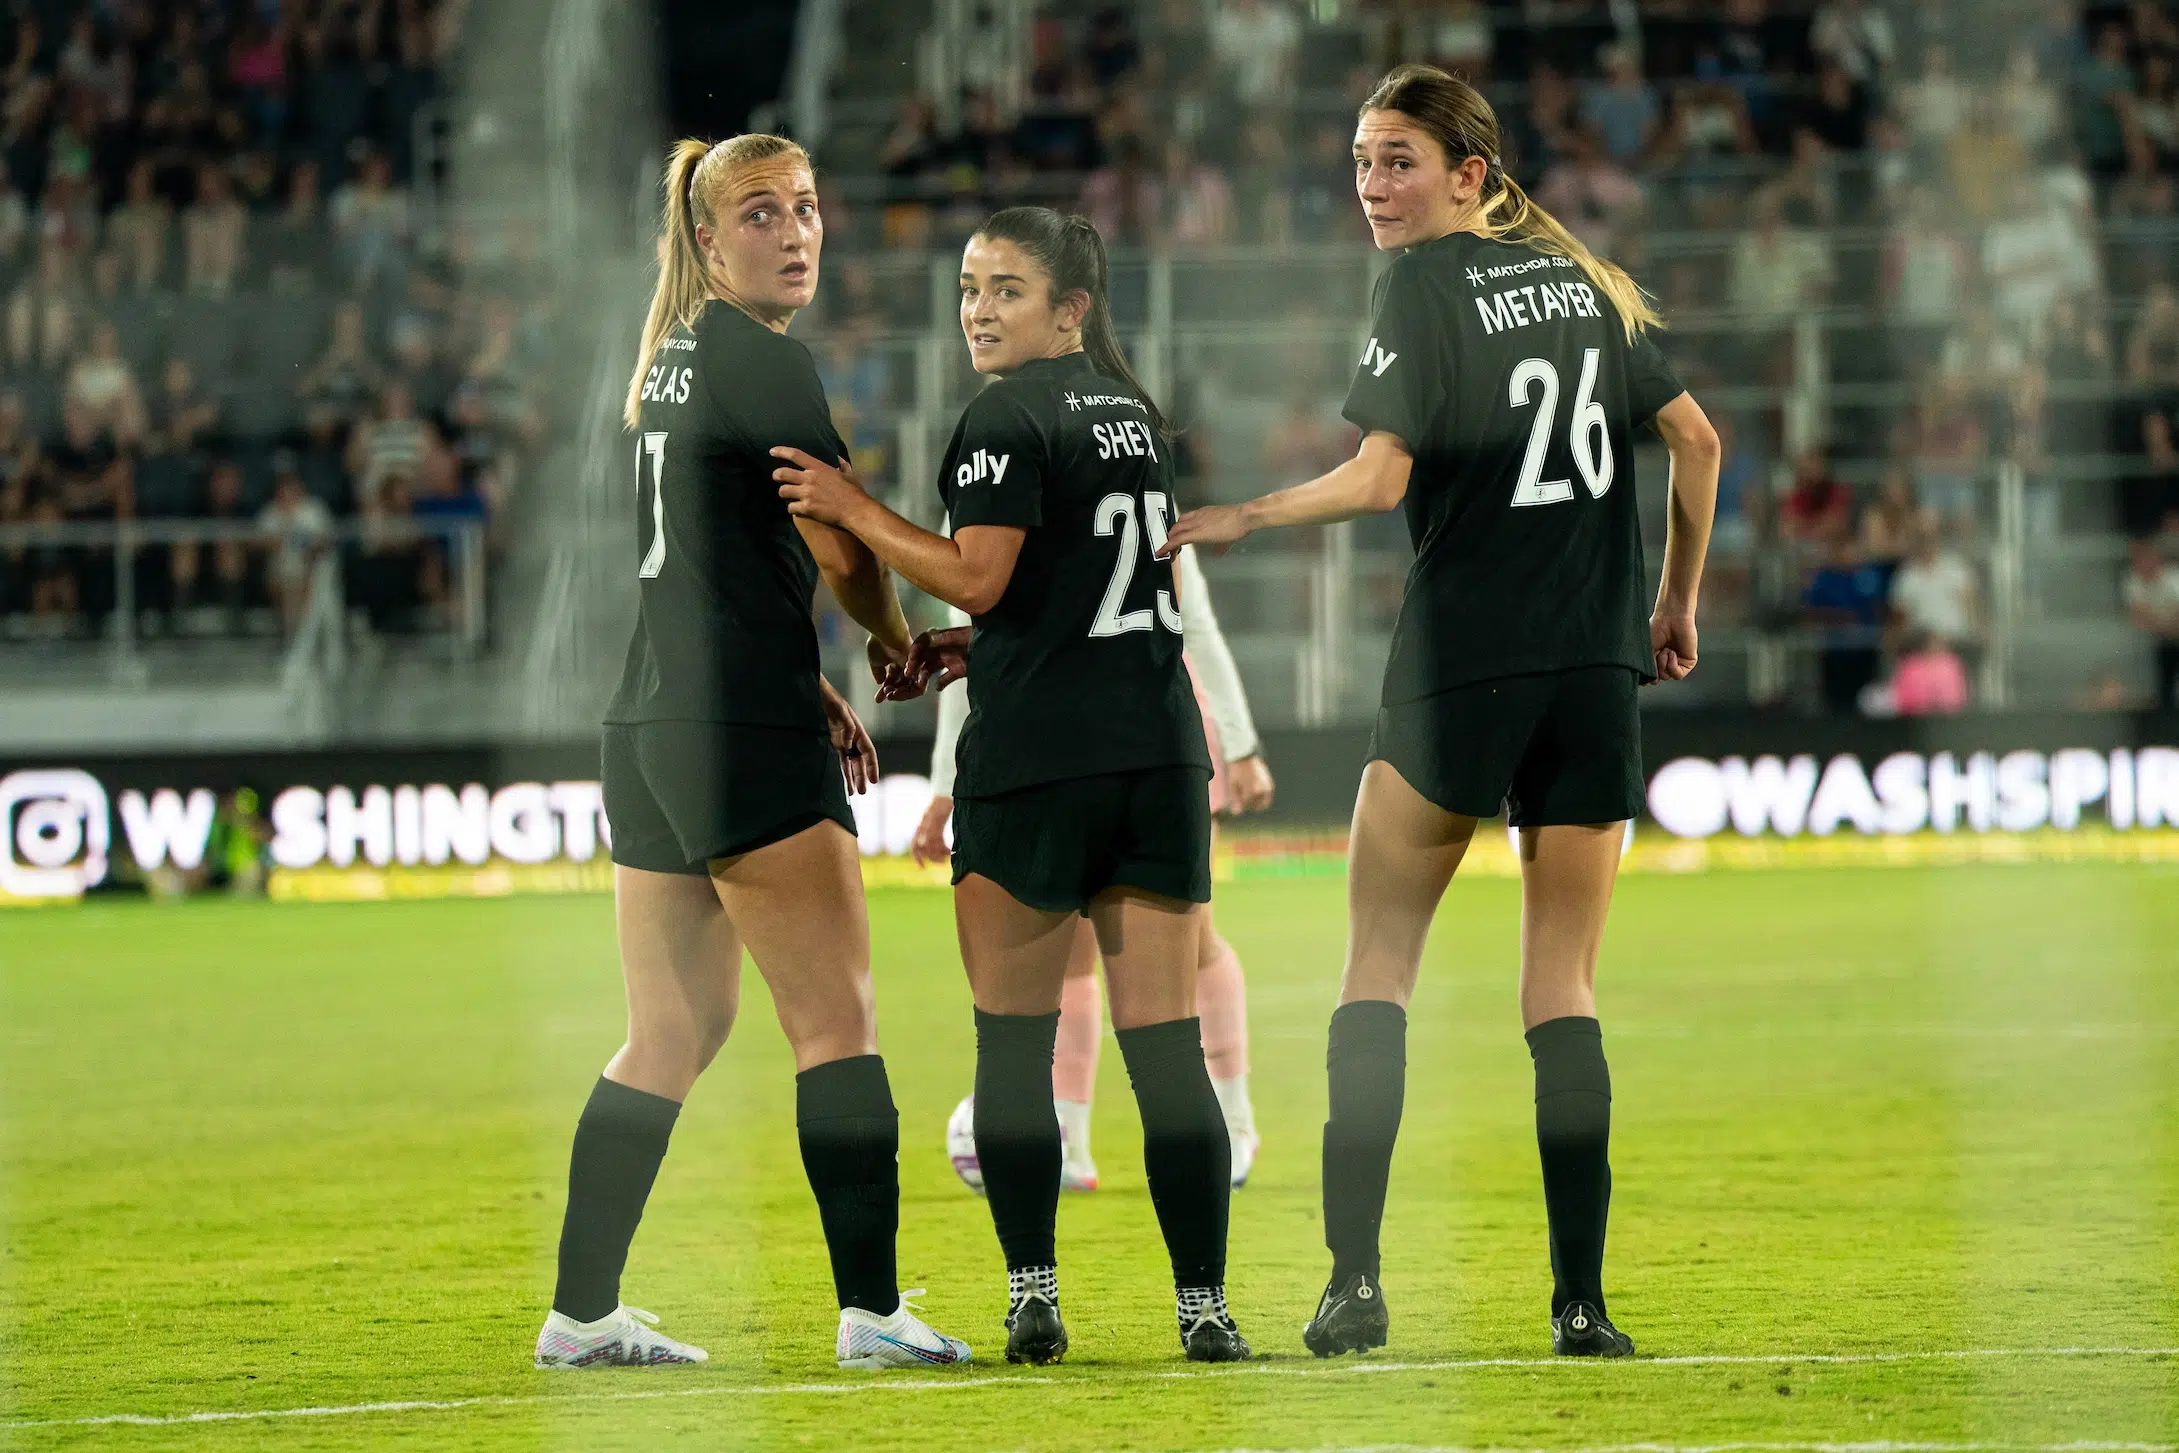 Three players in black uniforms stand in a line shoulder-to-shoulder and look back towards their goalie.